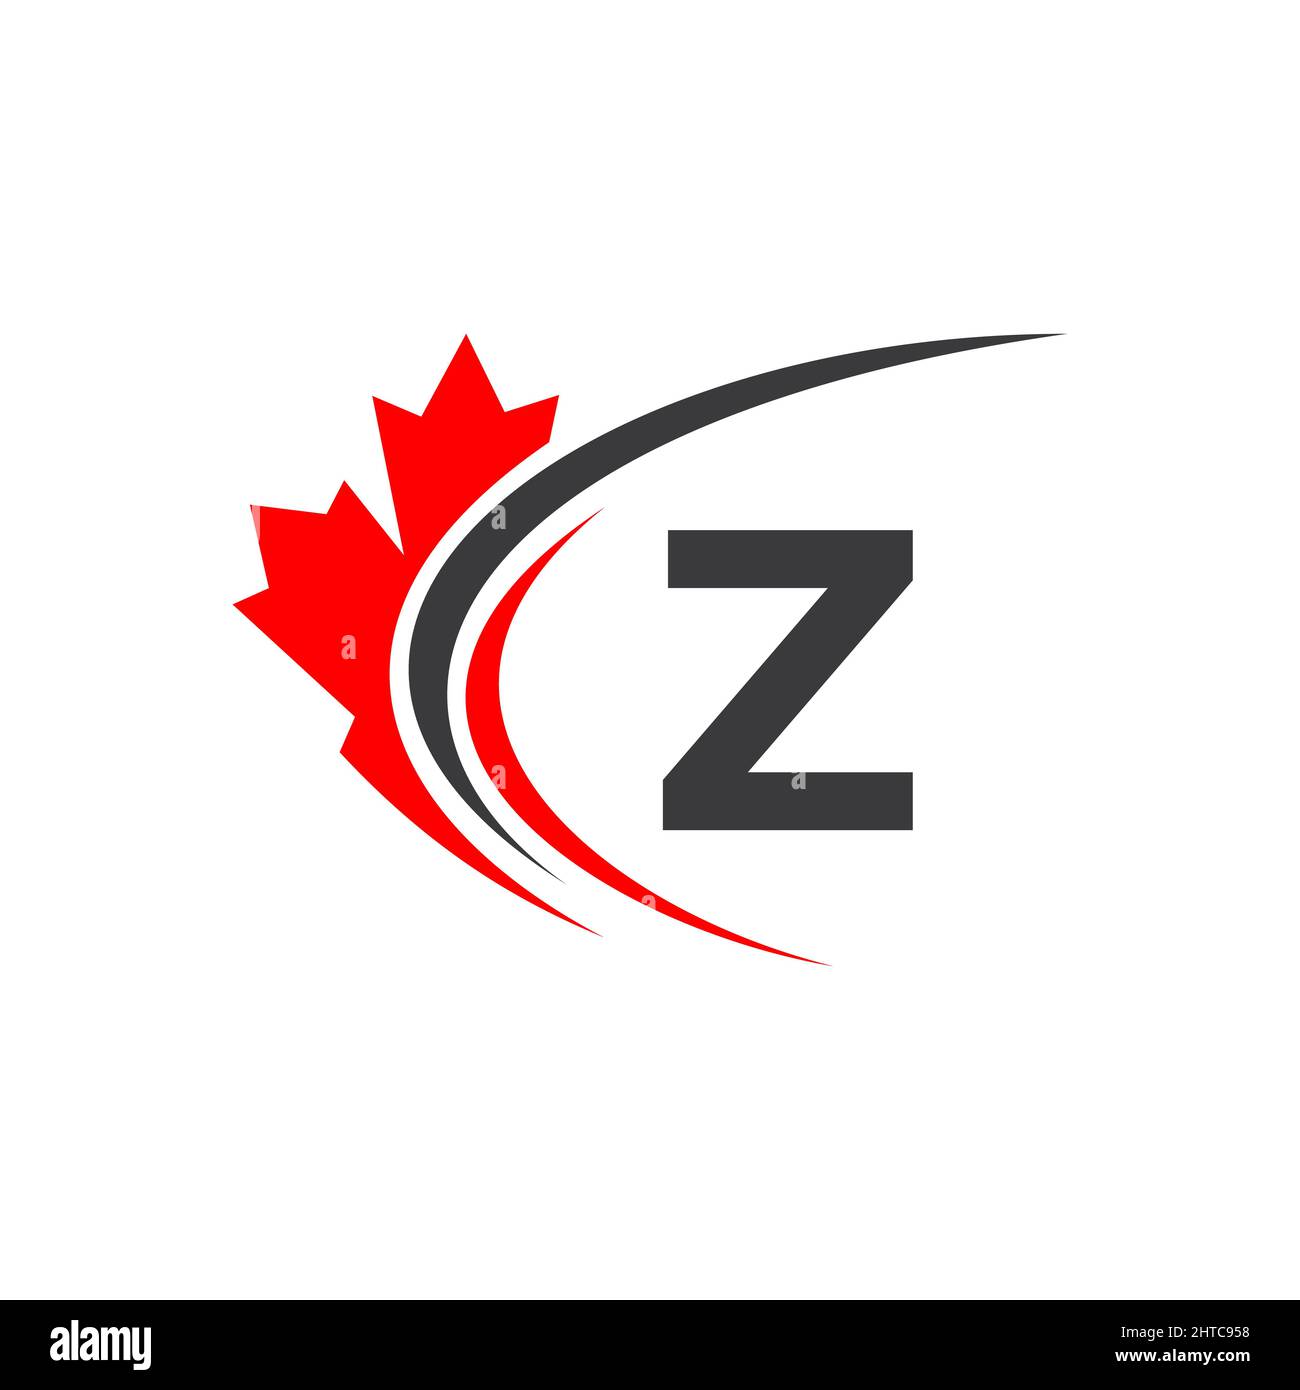 Maple Leaf On Letter Z Logo Design Template. Canadian Business Logo, Company And Sign On Red Maple Leaf With Z Letter Vector Stock Vector